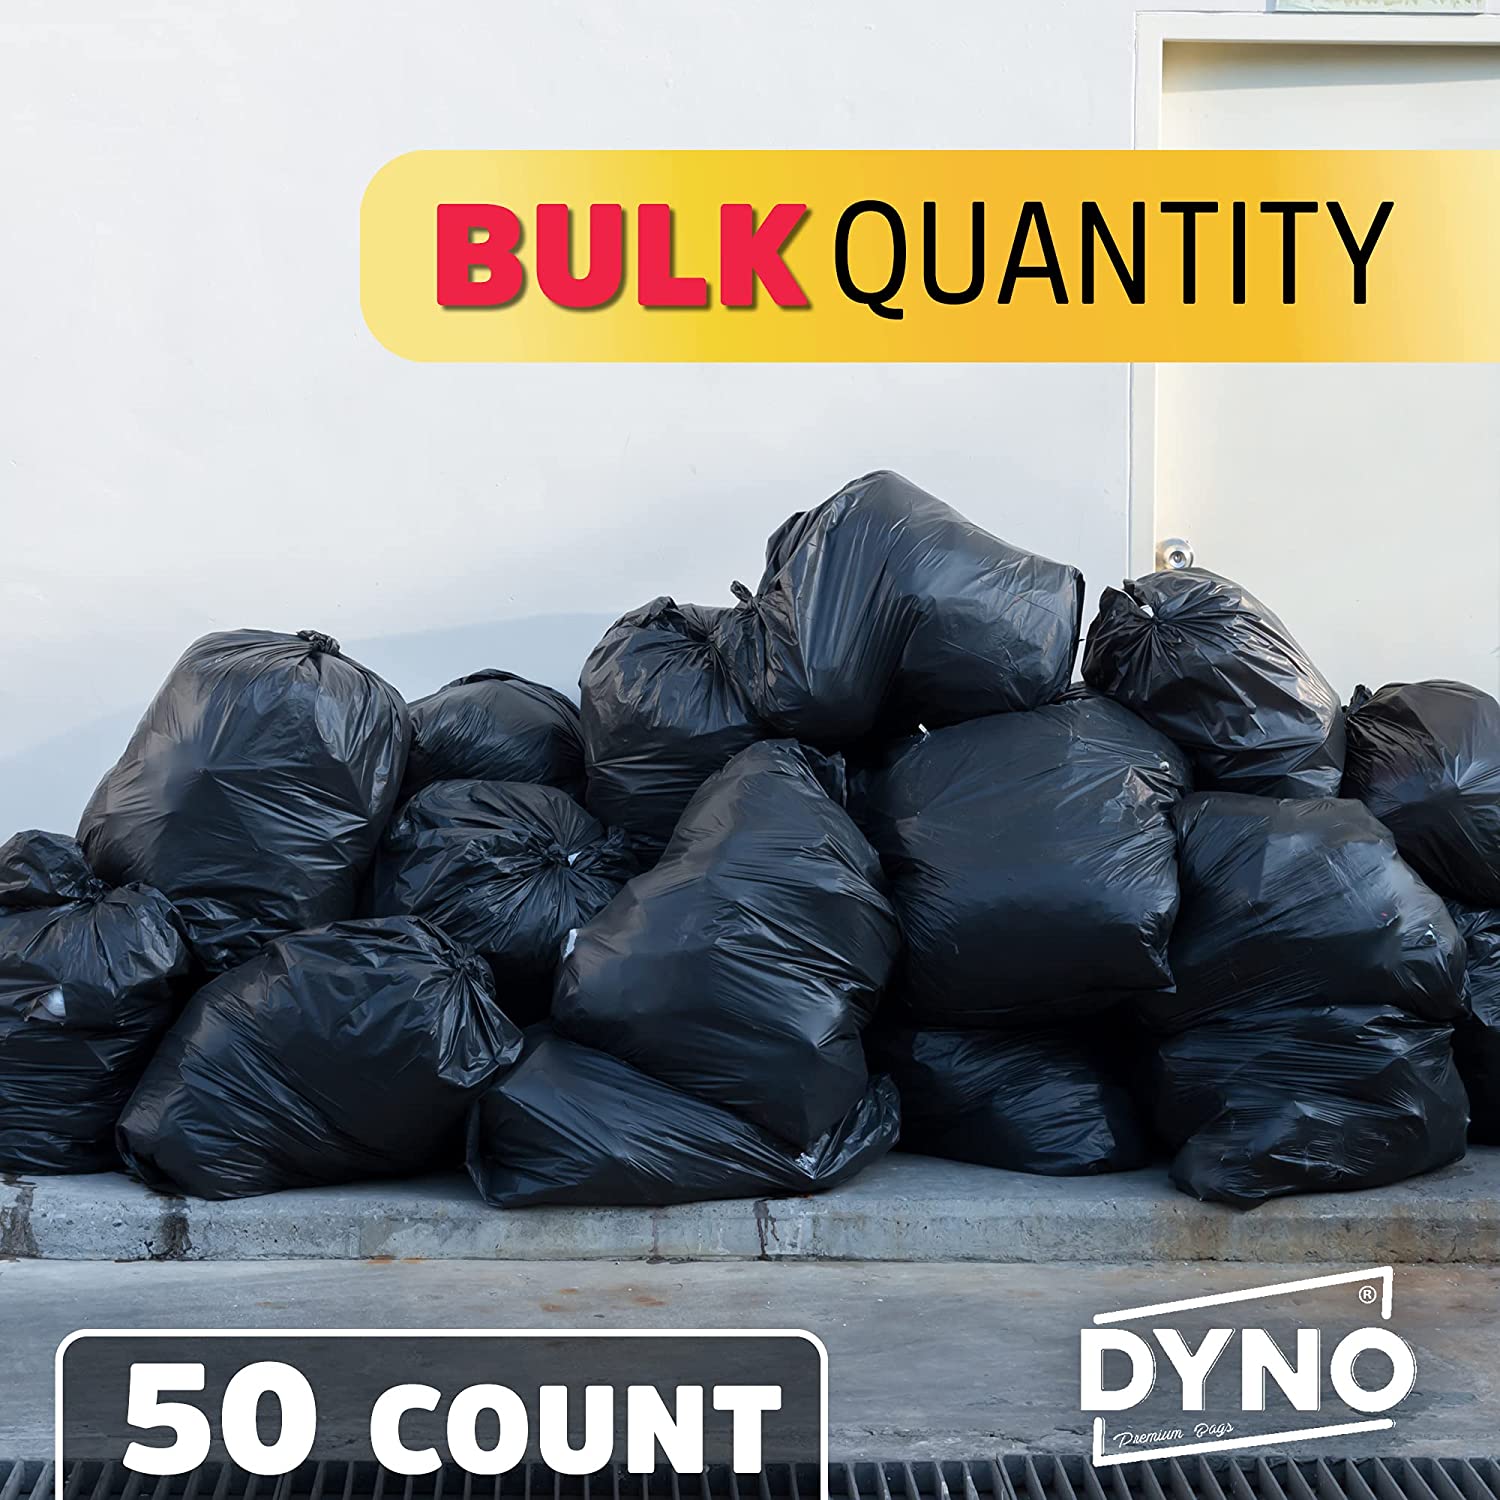 X-Large 65 Gallon Black Trash Bags - Heavy Duty Bags for Garbage, Storage -  1.5 Mil Thick, 50Wx48H Industrial Grade Trash Bags for Construction